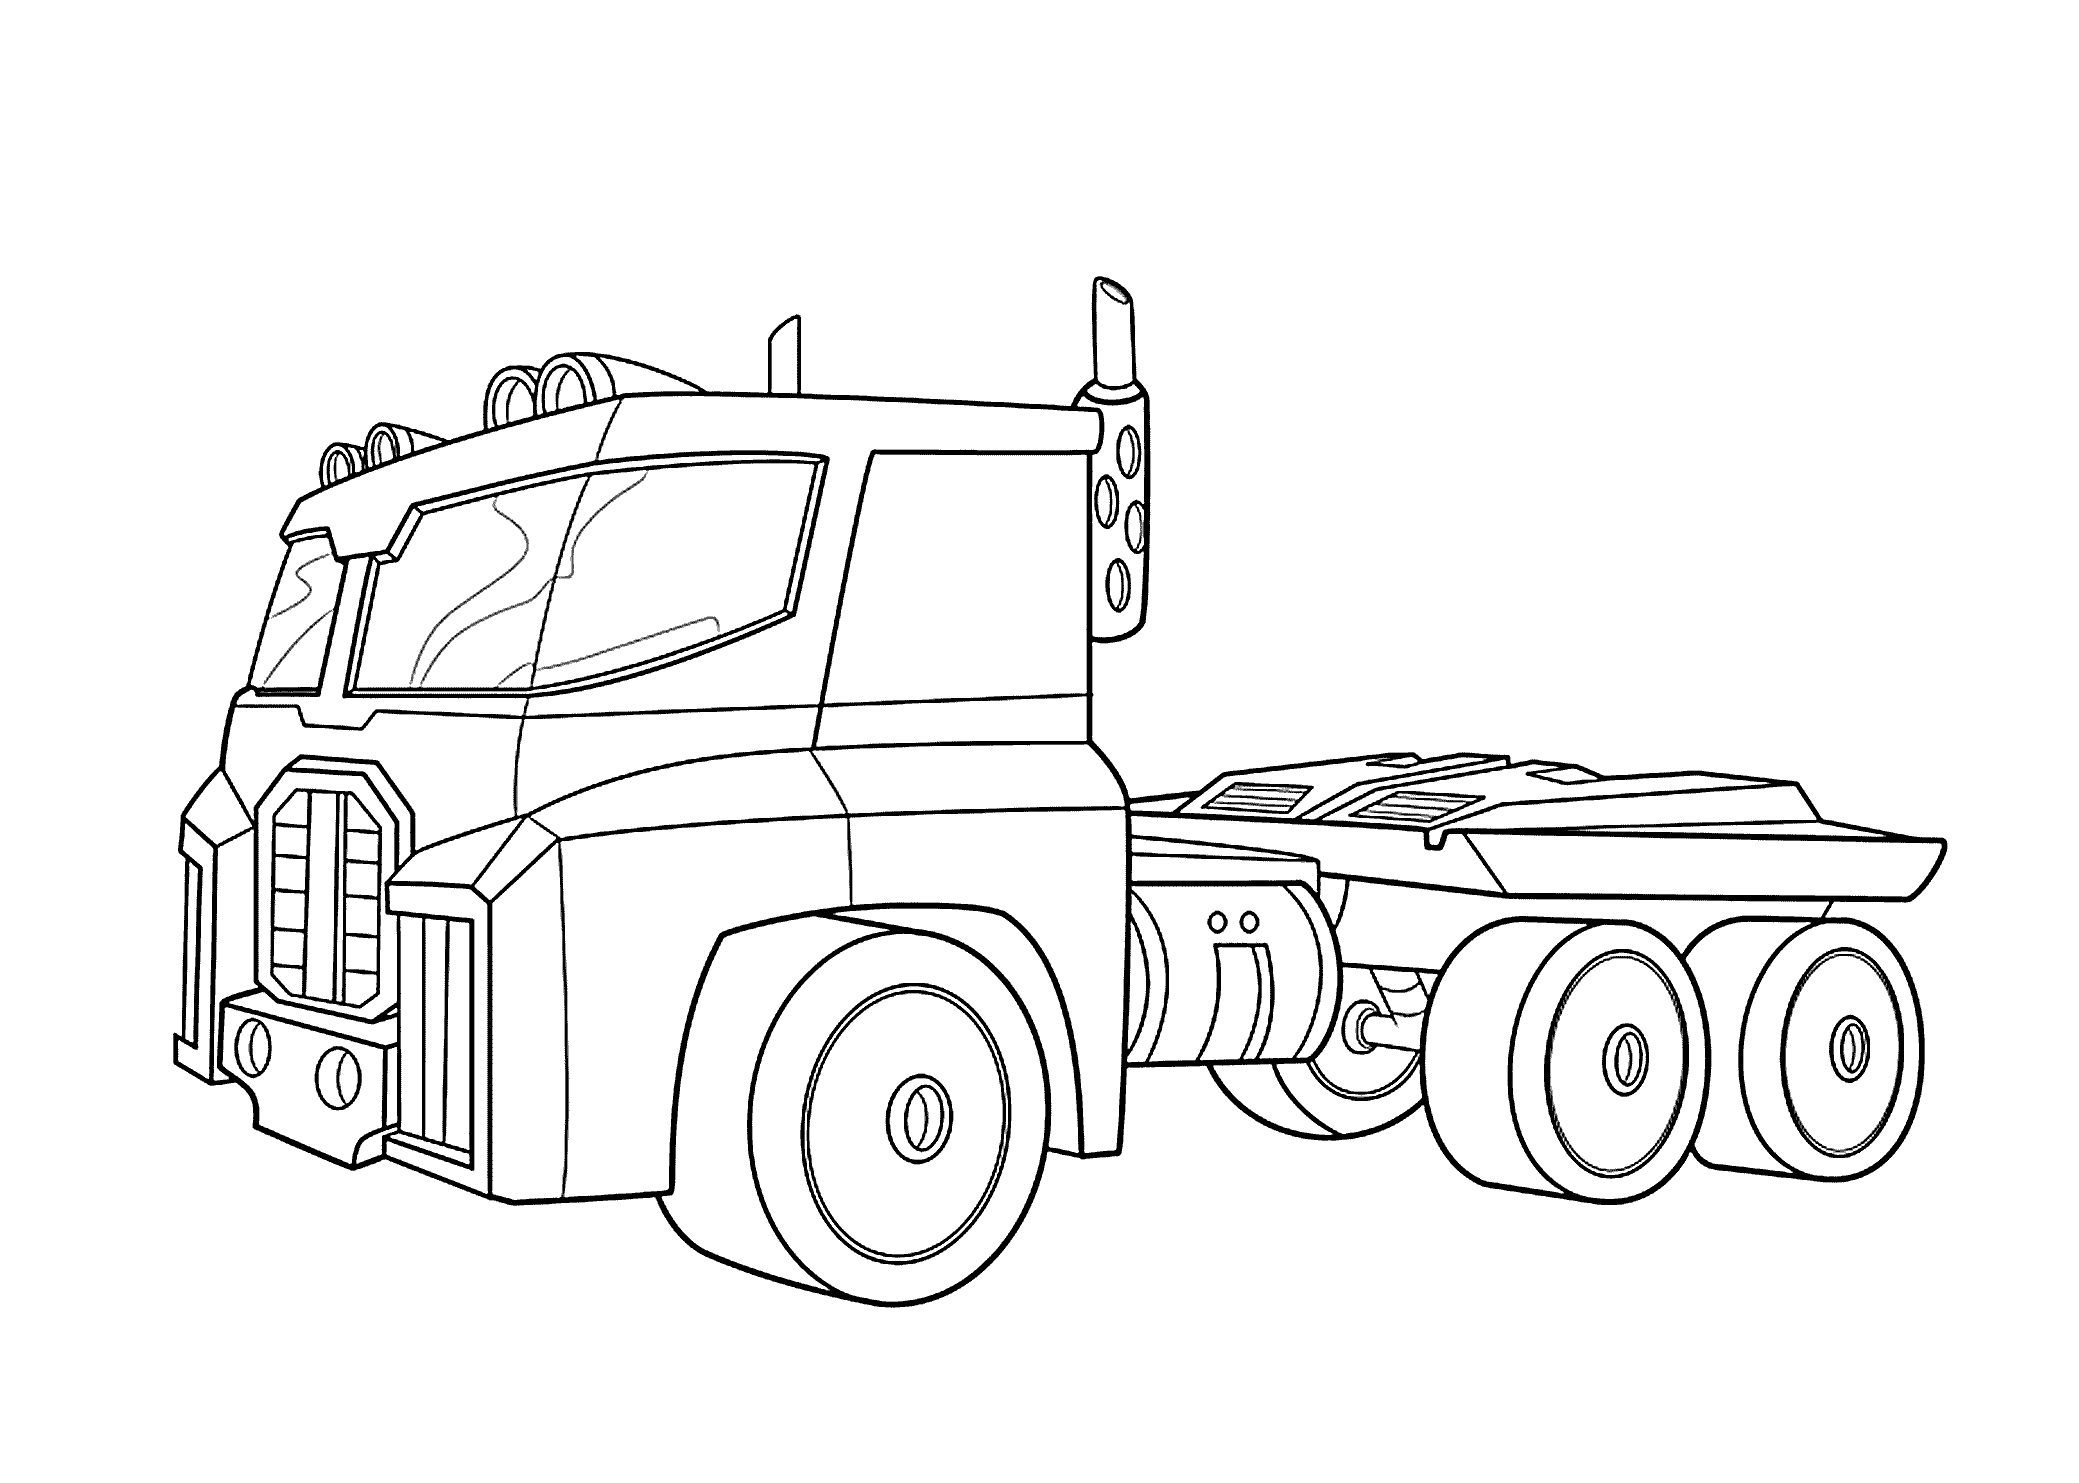 Optimus Prime Bot Coloring Pages For Kids Printable Free Rescue Bots Transformers Col